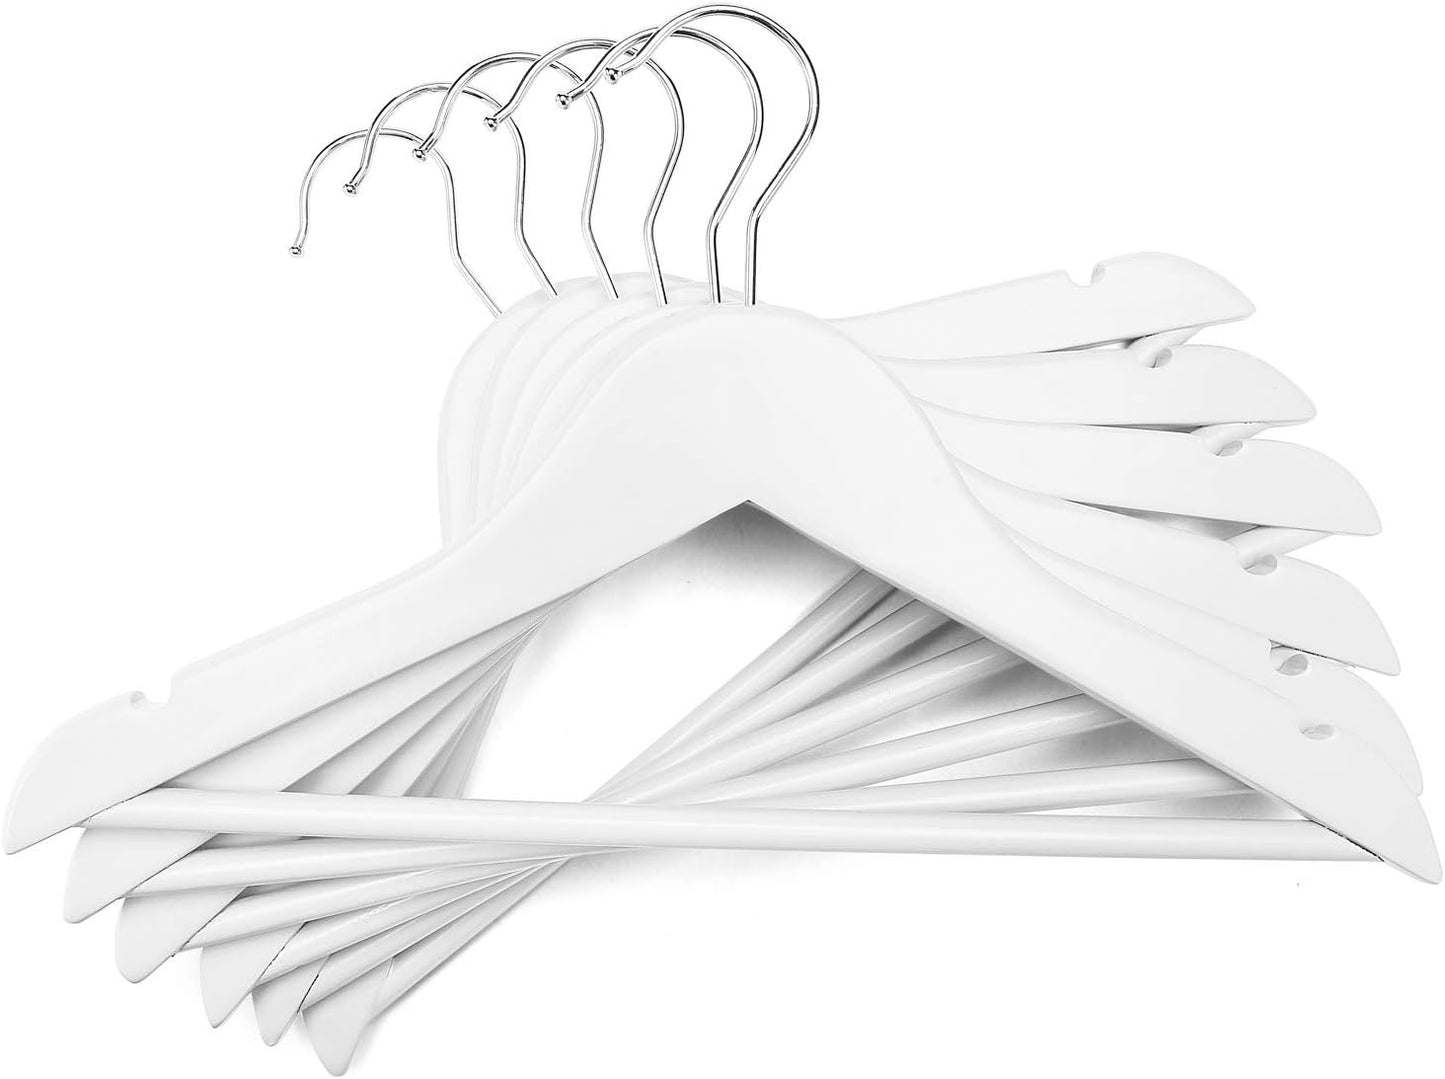 HOUSE DAY 12.6X7.9 Inch Wooden Childrens Hangers Kids Hangers White 20 Pack